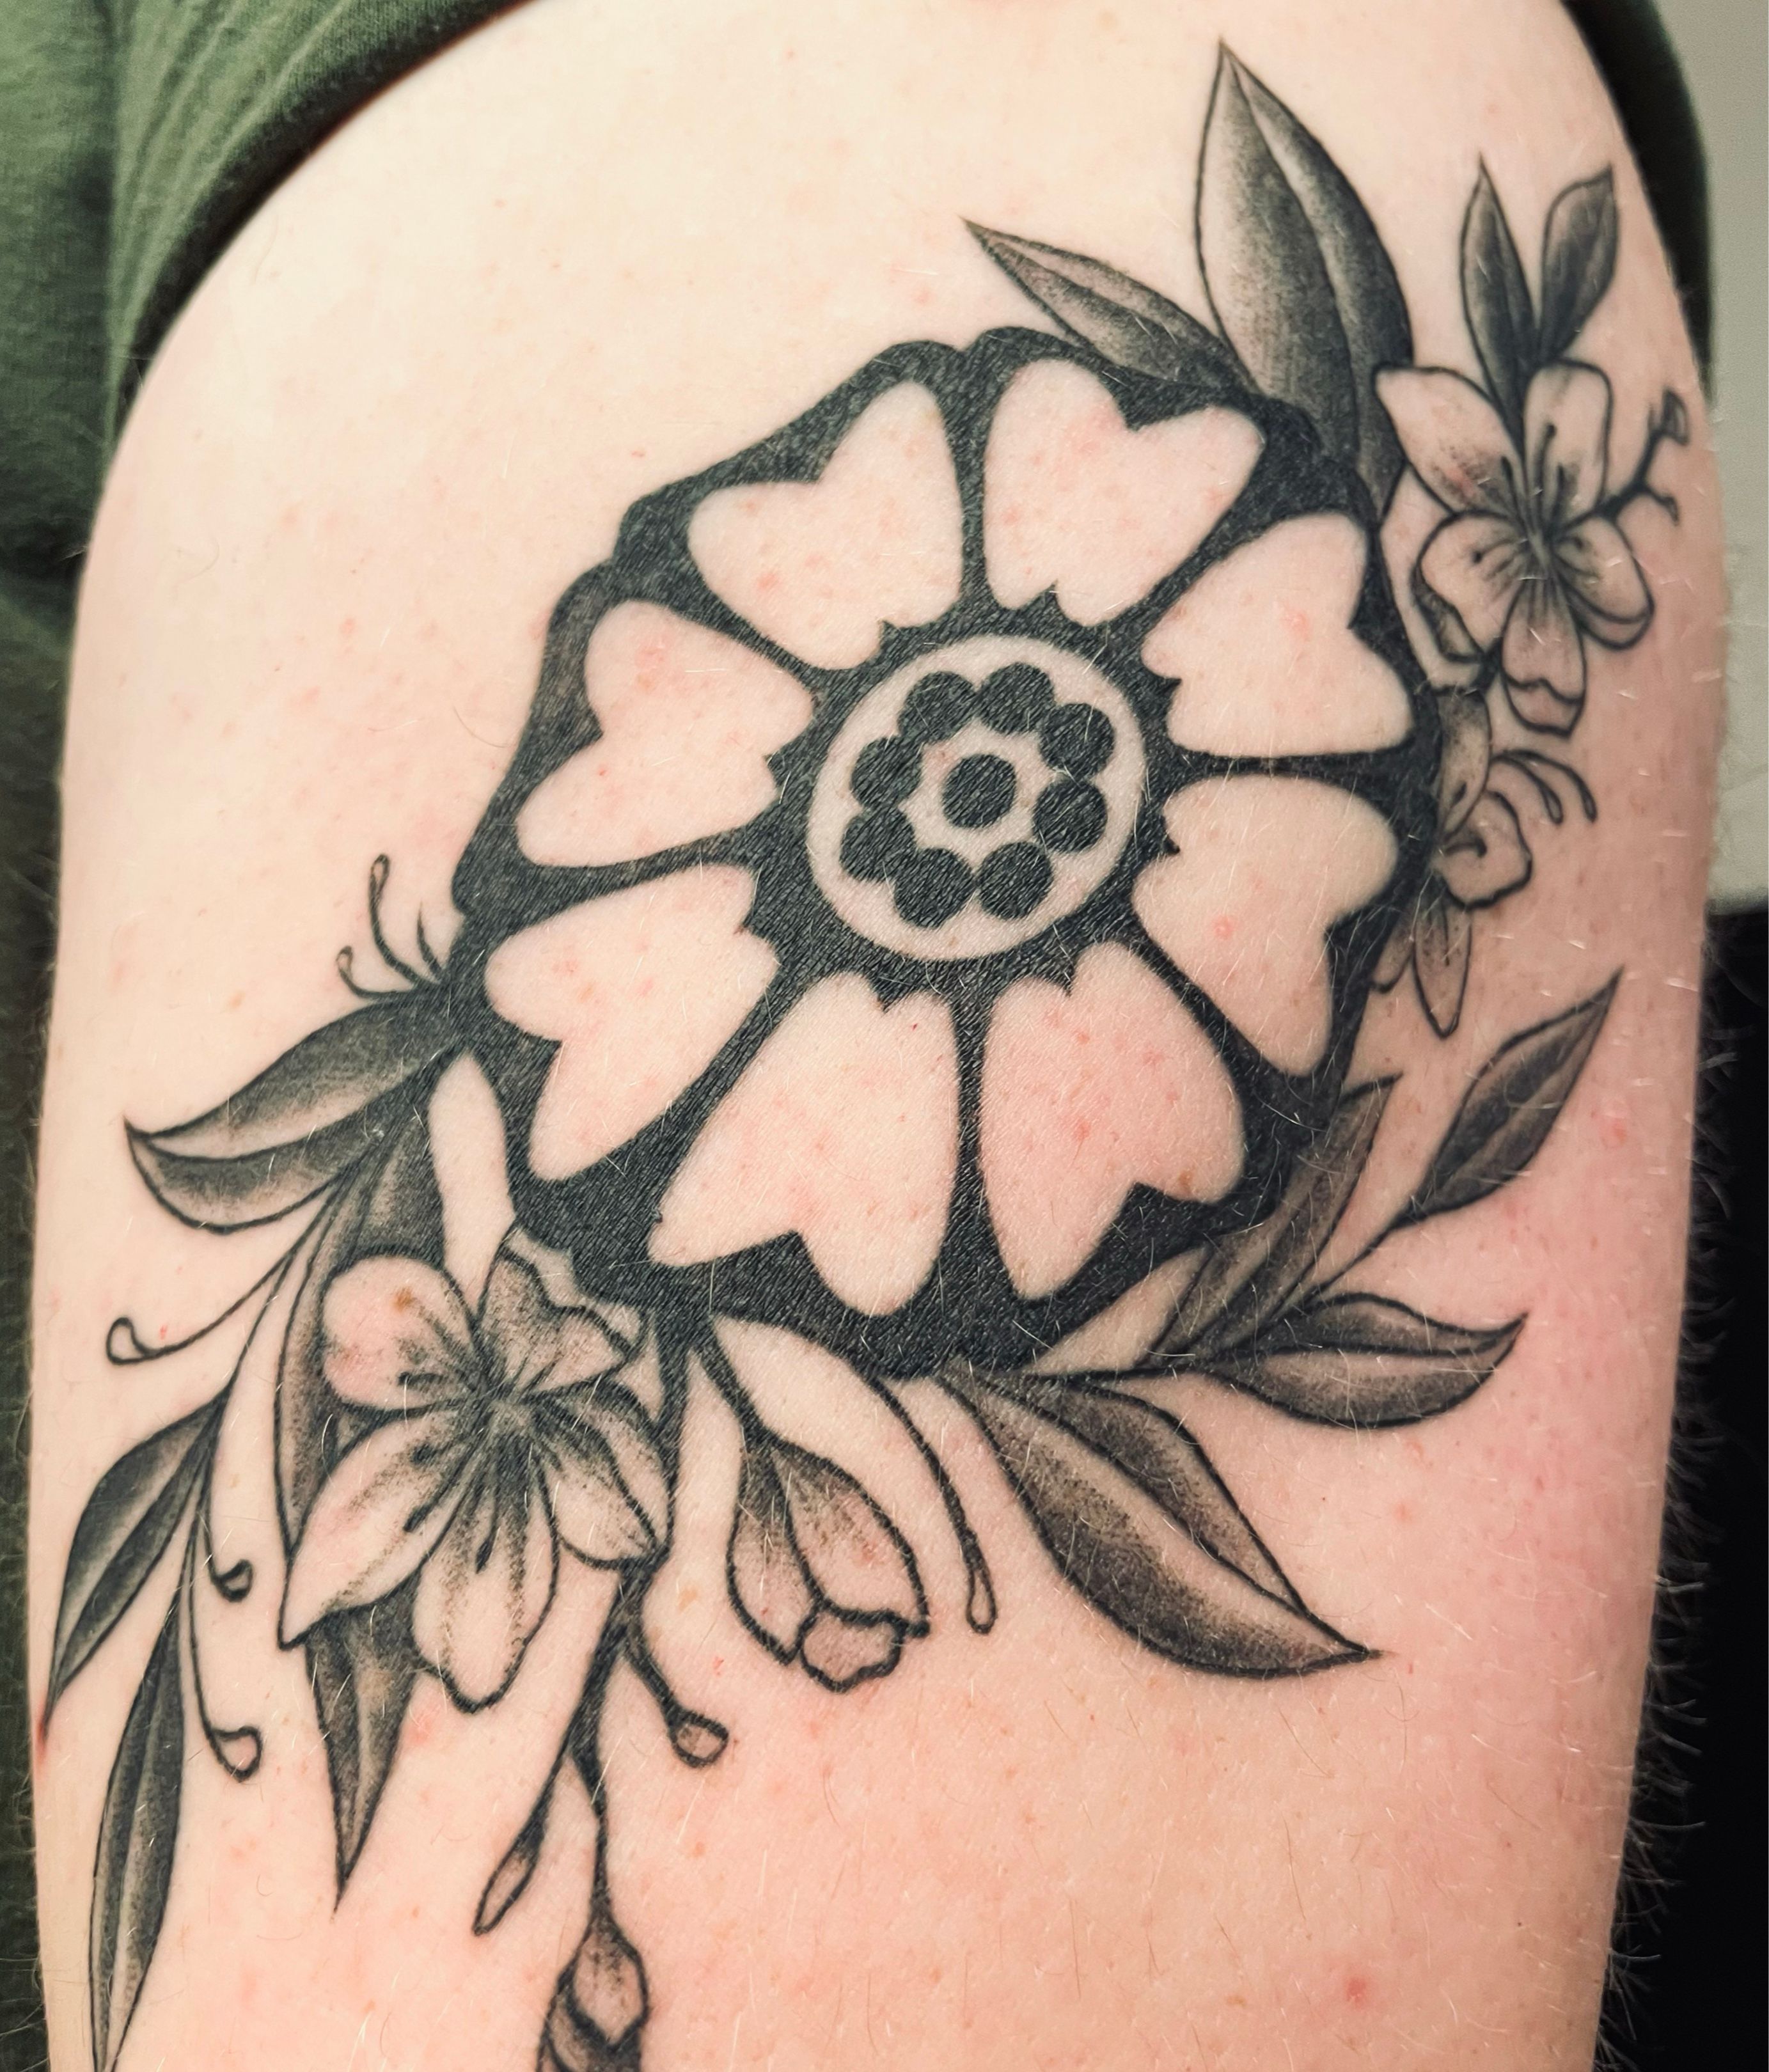 Just got my first tattoo and it was the white lotus flower   rTheLastAirbender